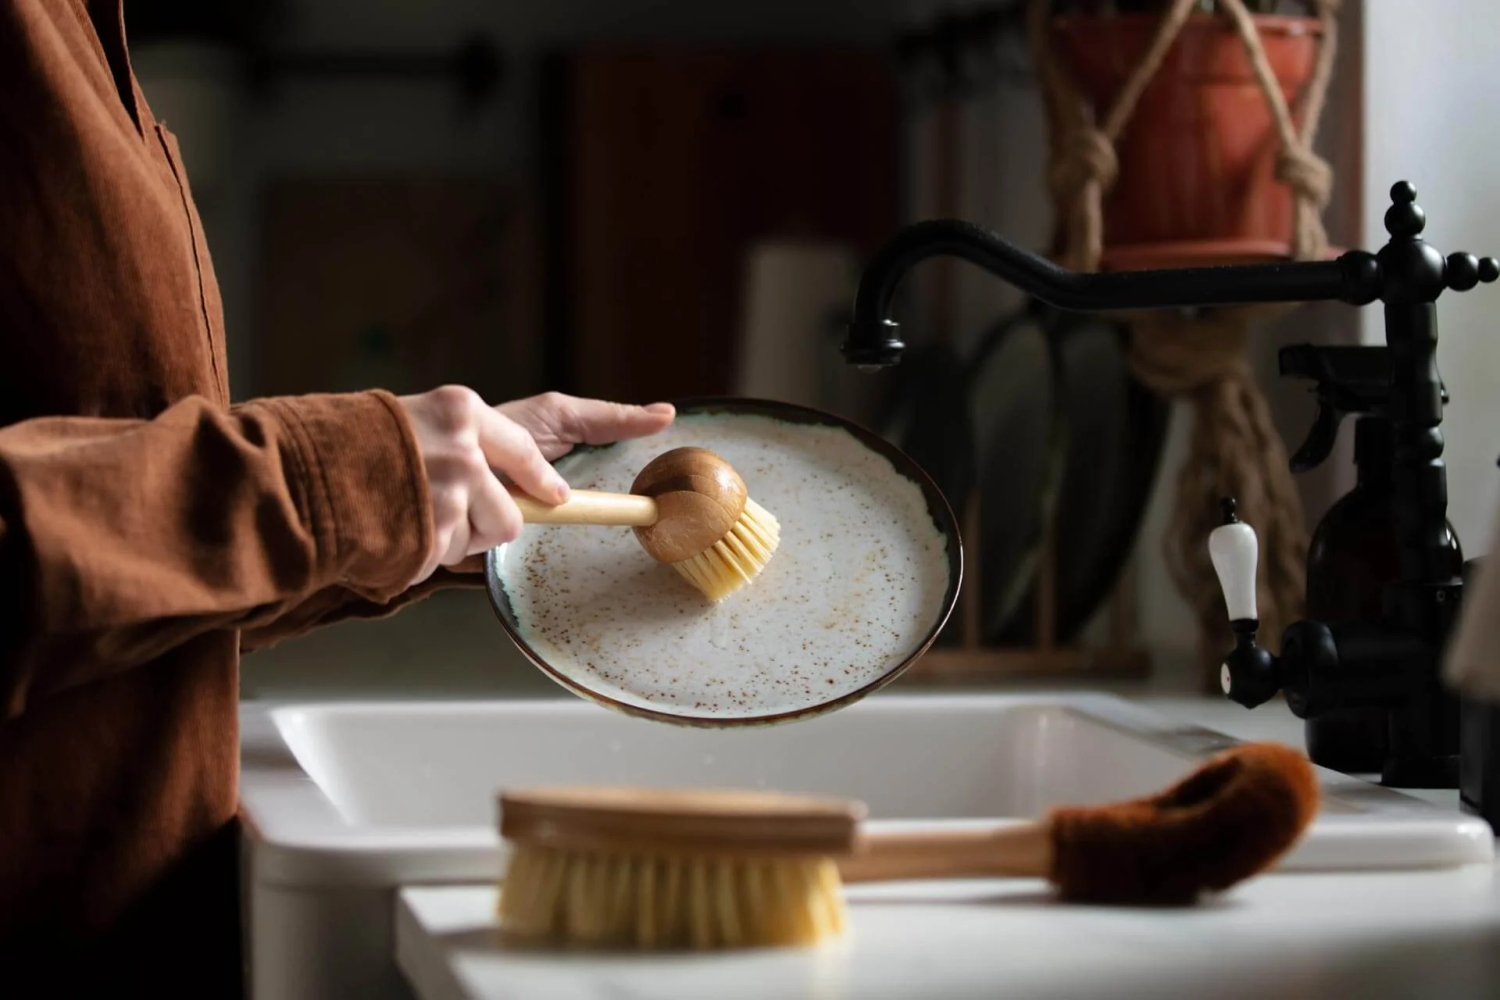 Washing a plate on top of a sink using a wooden brush